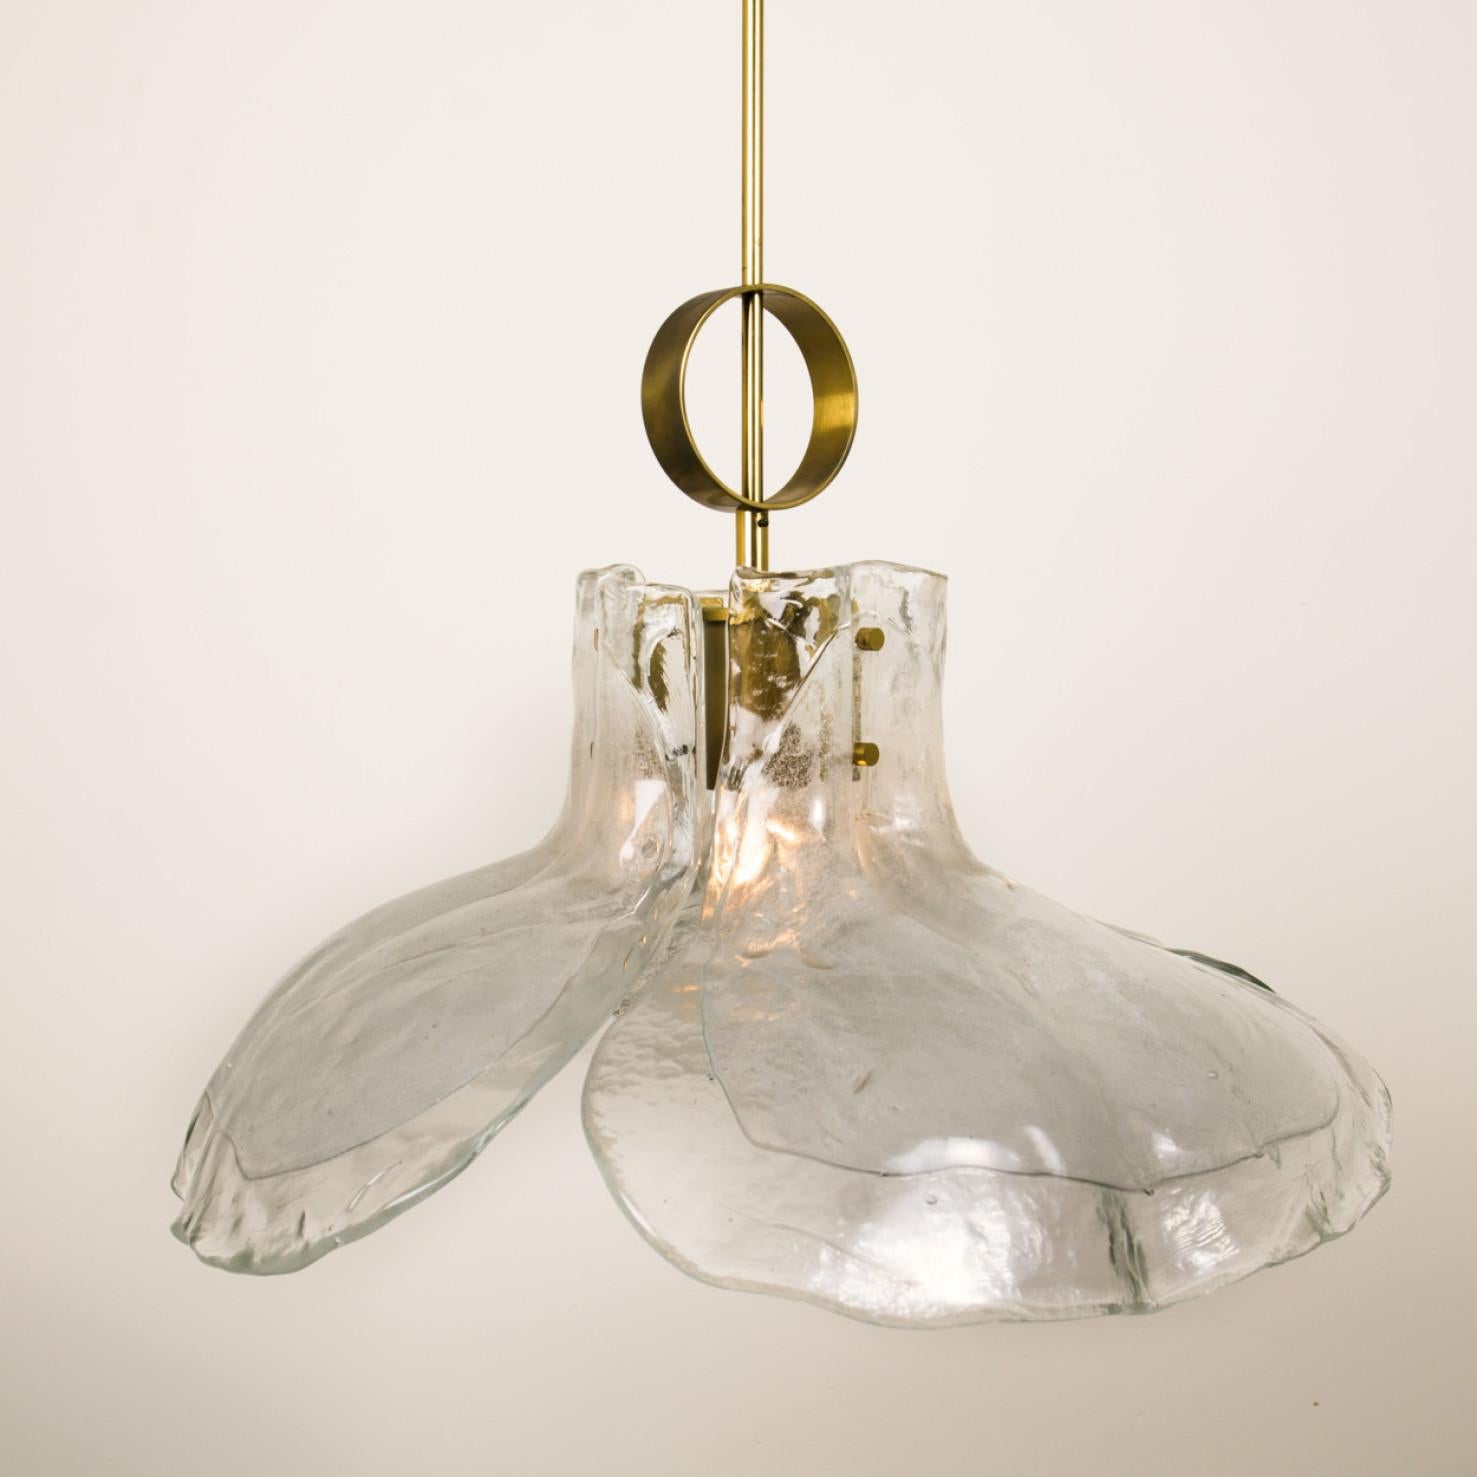 A beautiful midcentury brass chandelier with four melting glass panels in the shape of a flower.

Designed and executed by Kalmar Vienna in the 1970s. Hand blown melting glass, made of clear glass. Has a very nice ornamental ring on its brass rod.